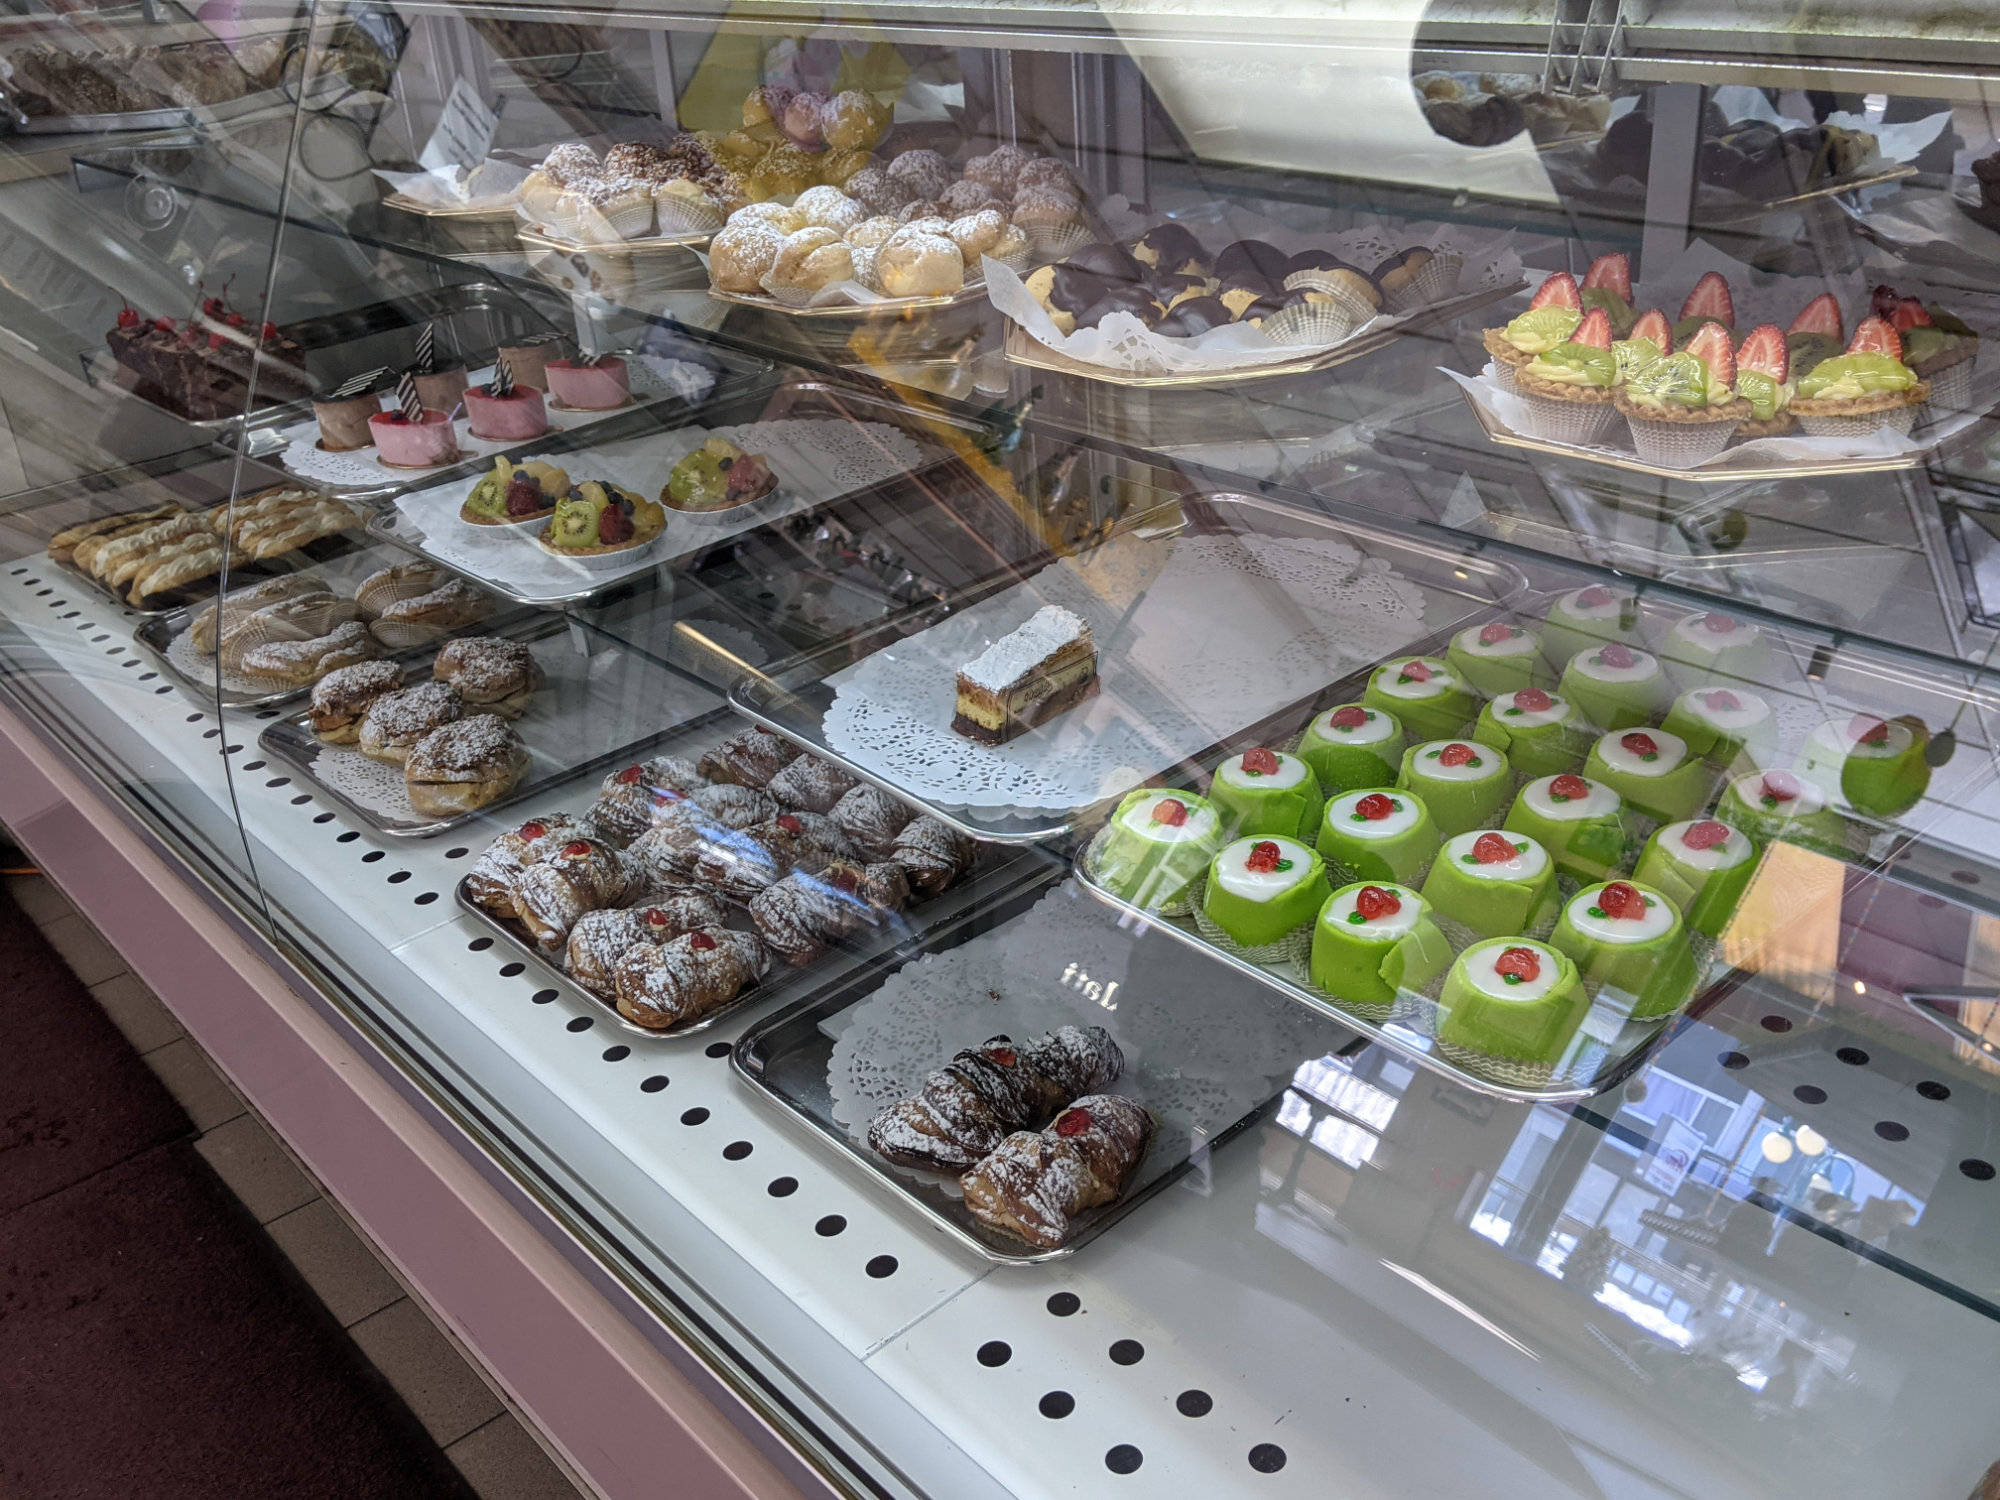 Image of pastries